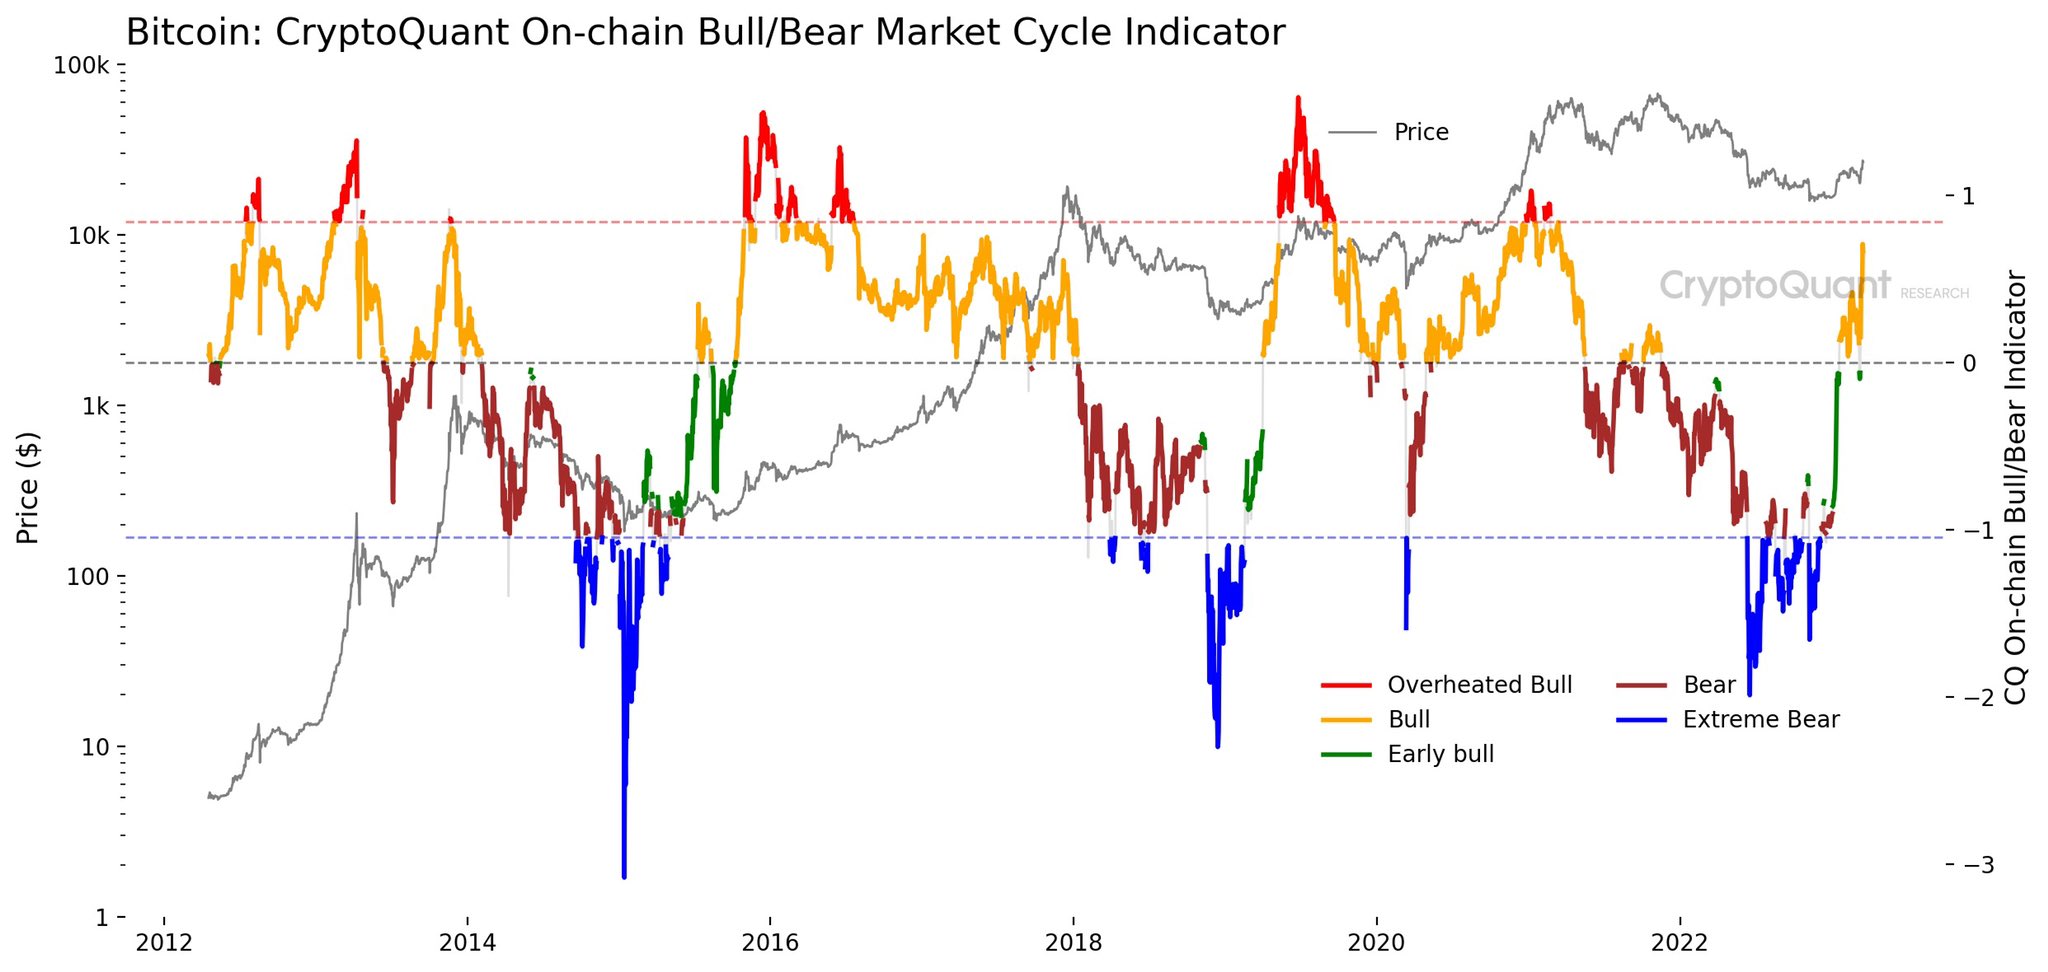  on chain bull/bear market cycle. Sumber: Cryptoquant